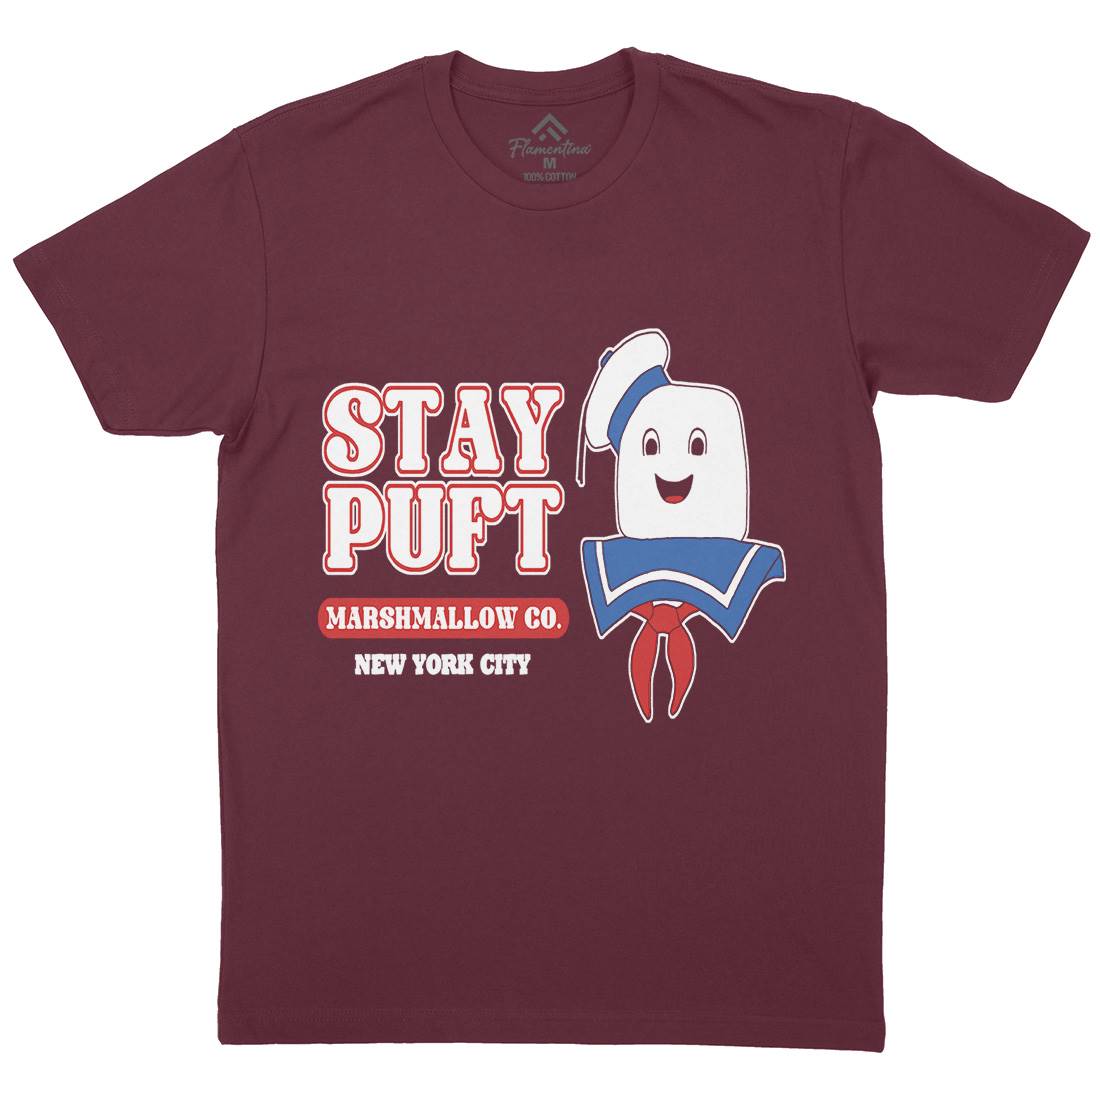 Stay Puft Co Mens Organic Crew Neck T-Shirt Space D141